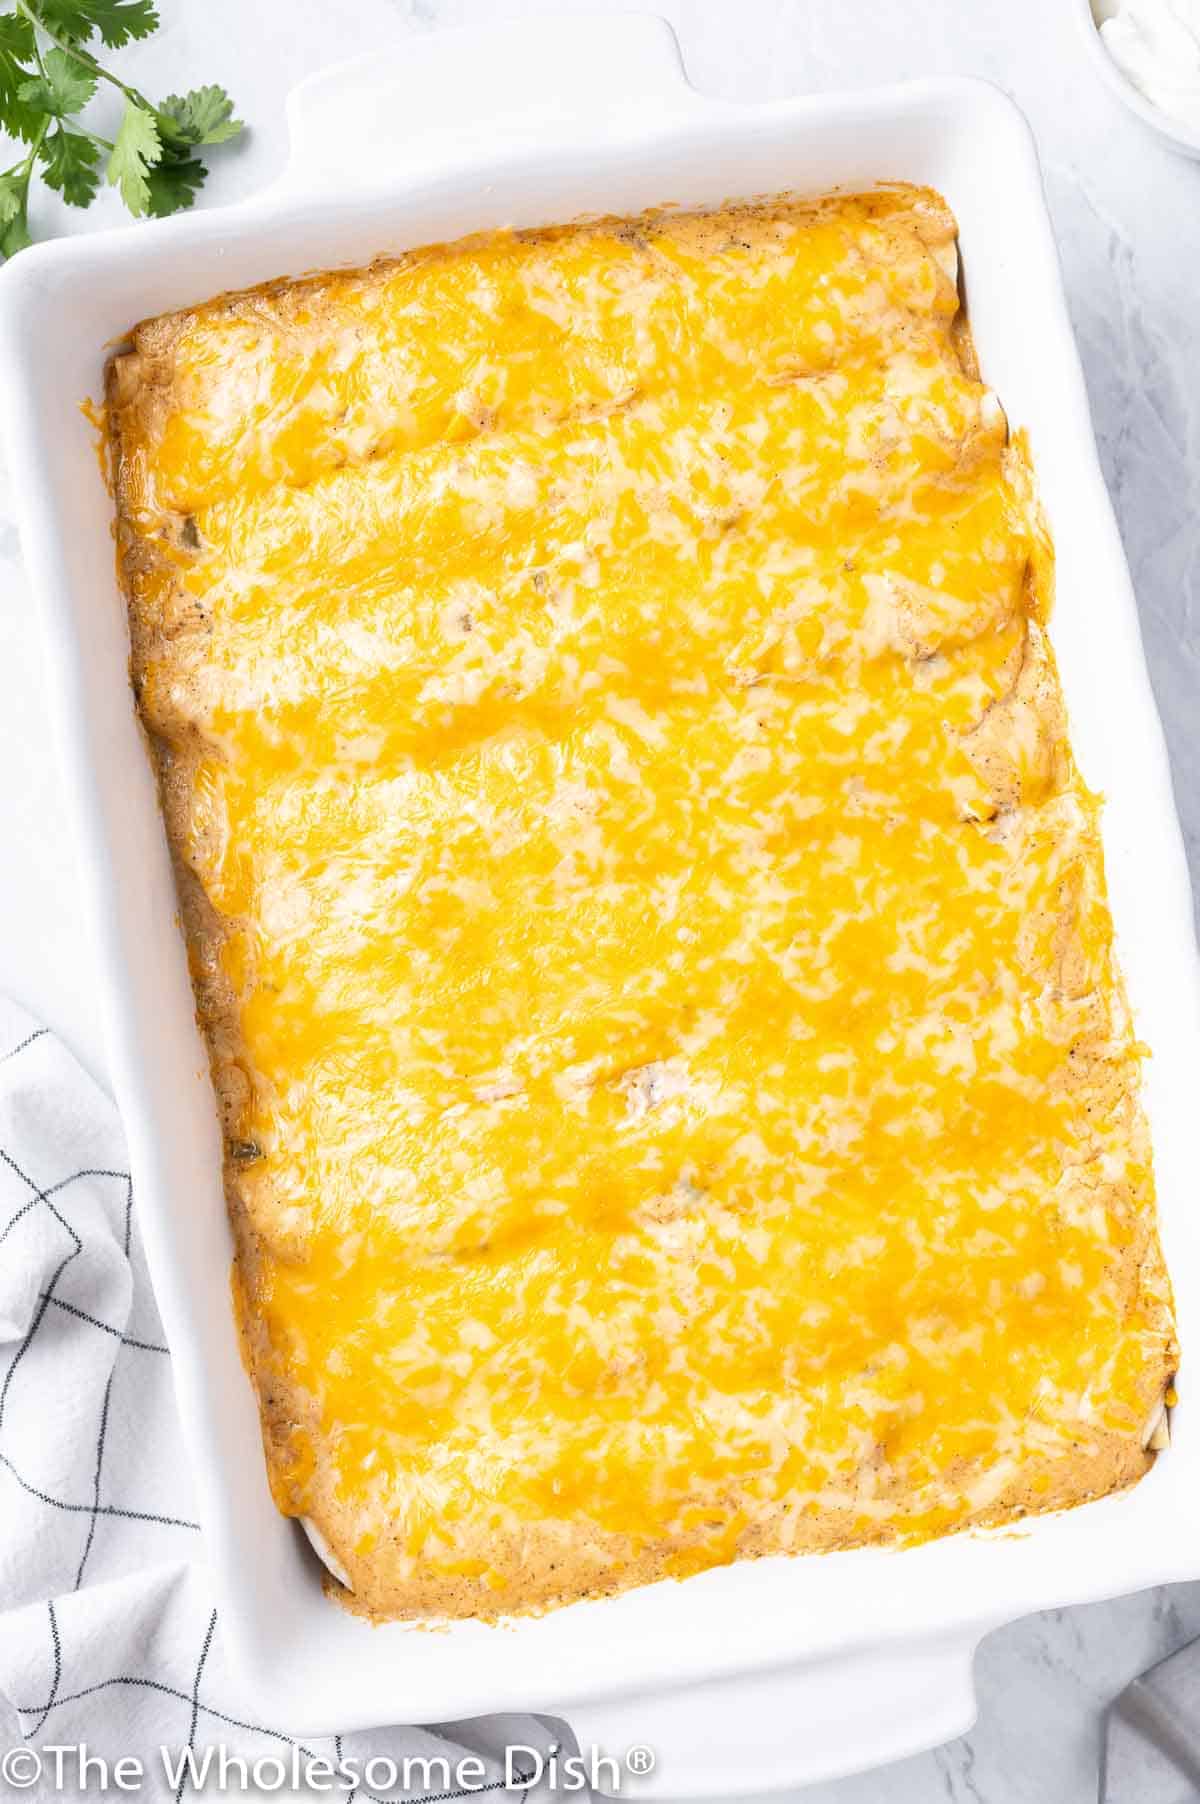 Baking dish full of enchiladas covered in melted cheese